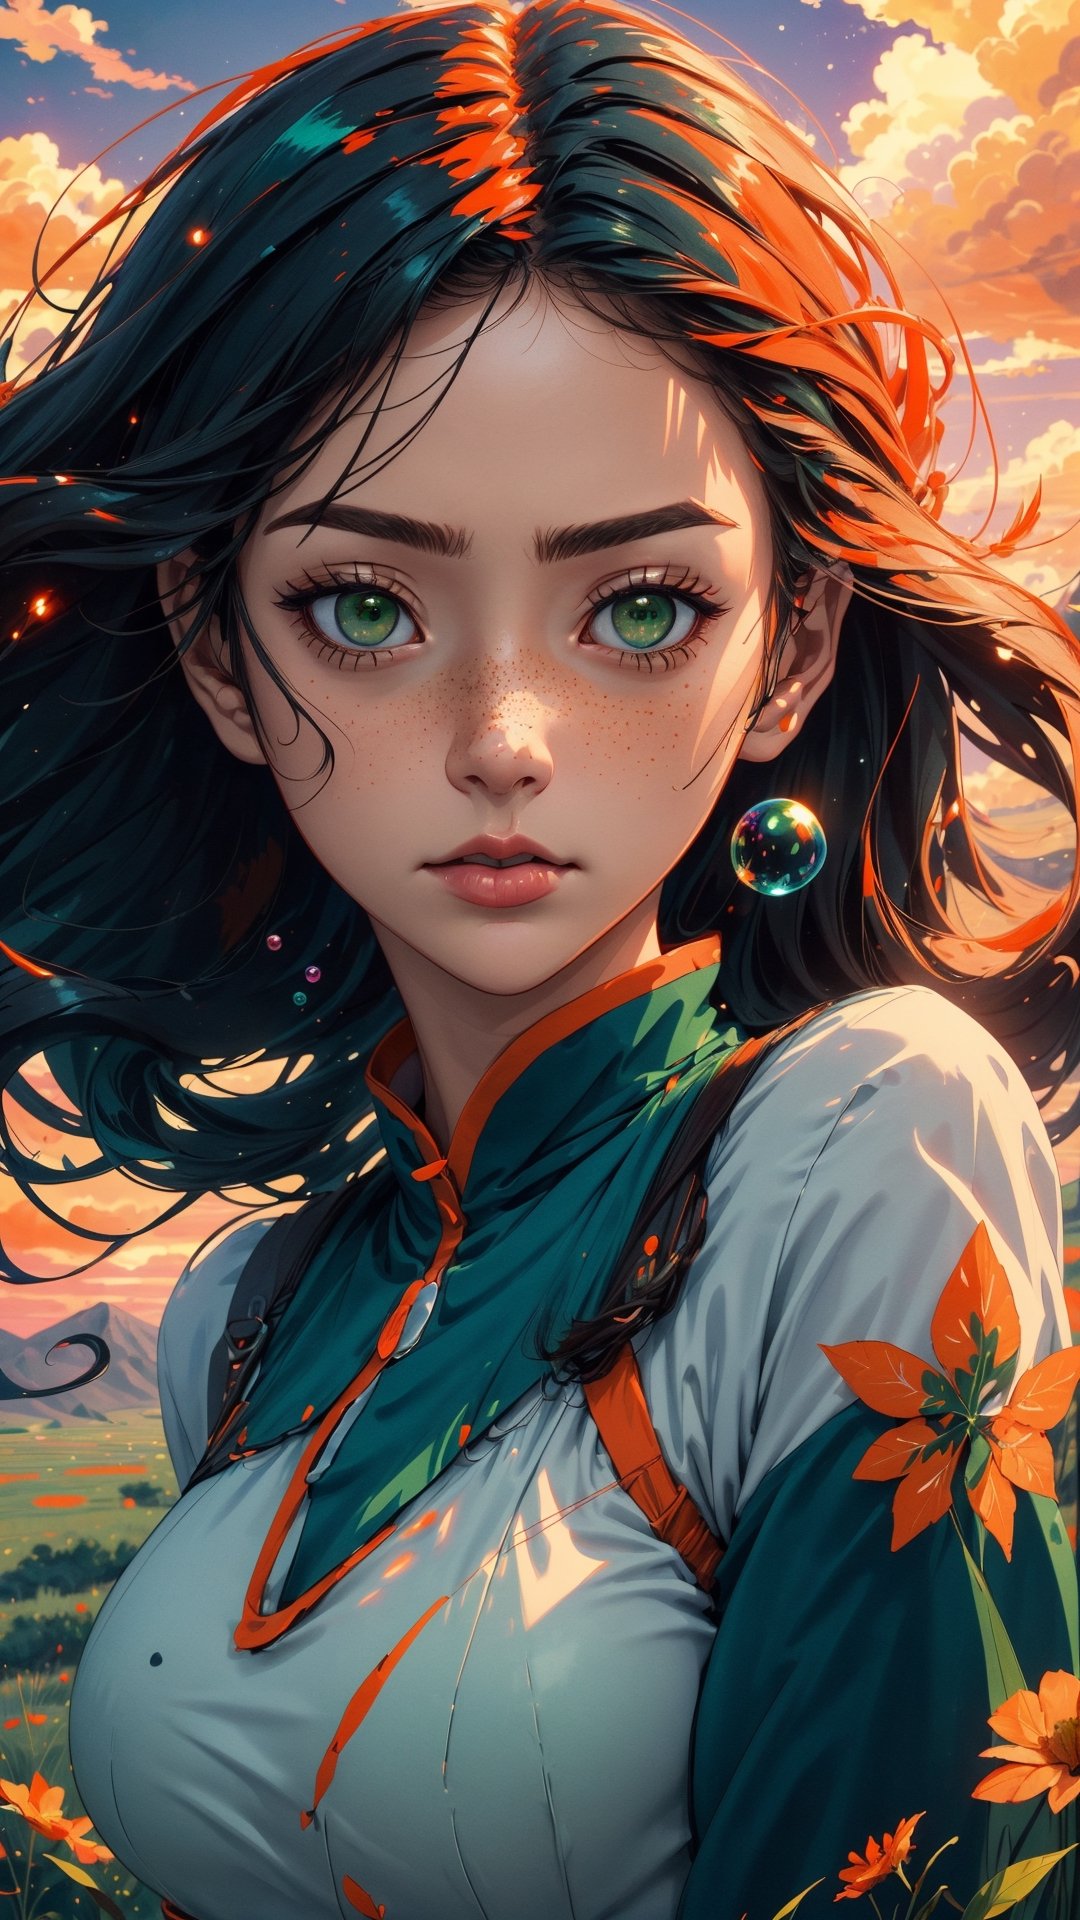 ((masterpiece)), (best quality), (cinematic), a woman in a long white dress, running through an open field, long black hair, bangs, chubby, wide hips, green eyes, freckles on her cheeks, wind , detailed face, detailed body, red and orange sky, glow, clouds, vegetation, green plains, floating bubbles, (cinematic, colorful), vast field, (extremely detailed), inspired by Studio Ghibli, EpicSky, cloud, sky, very detailed, detailed face